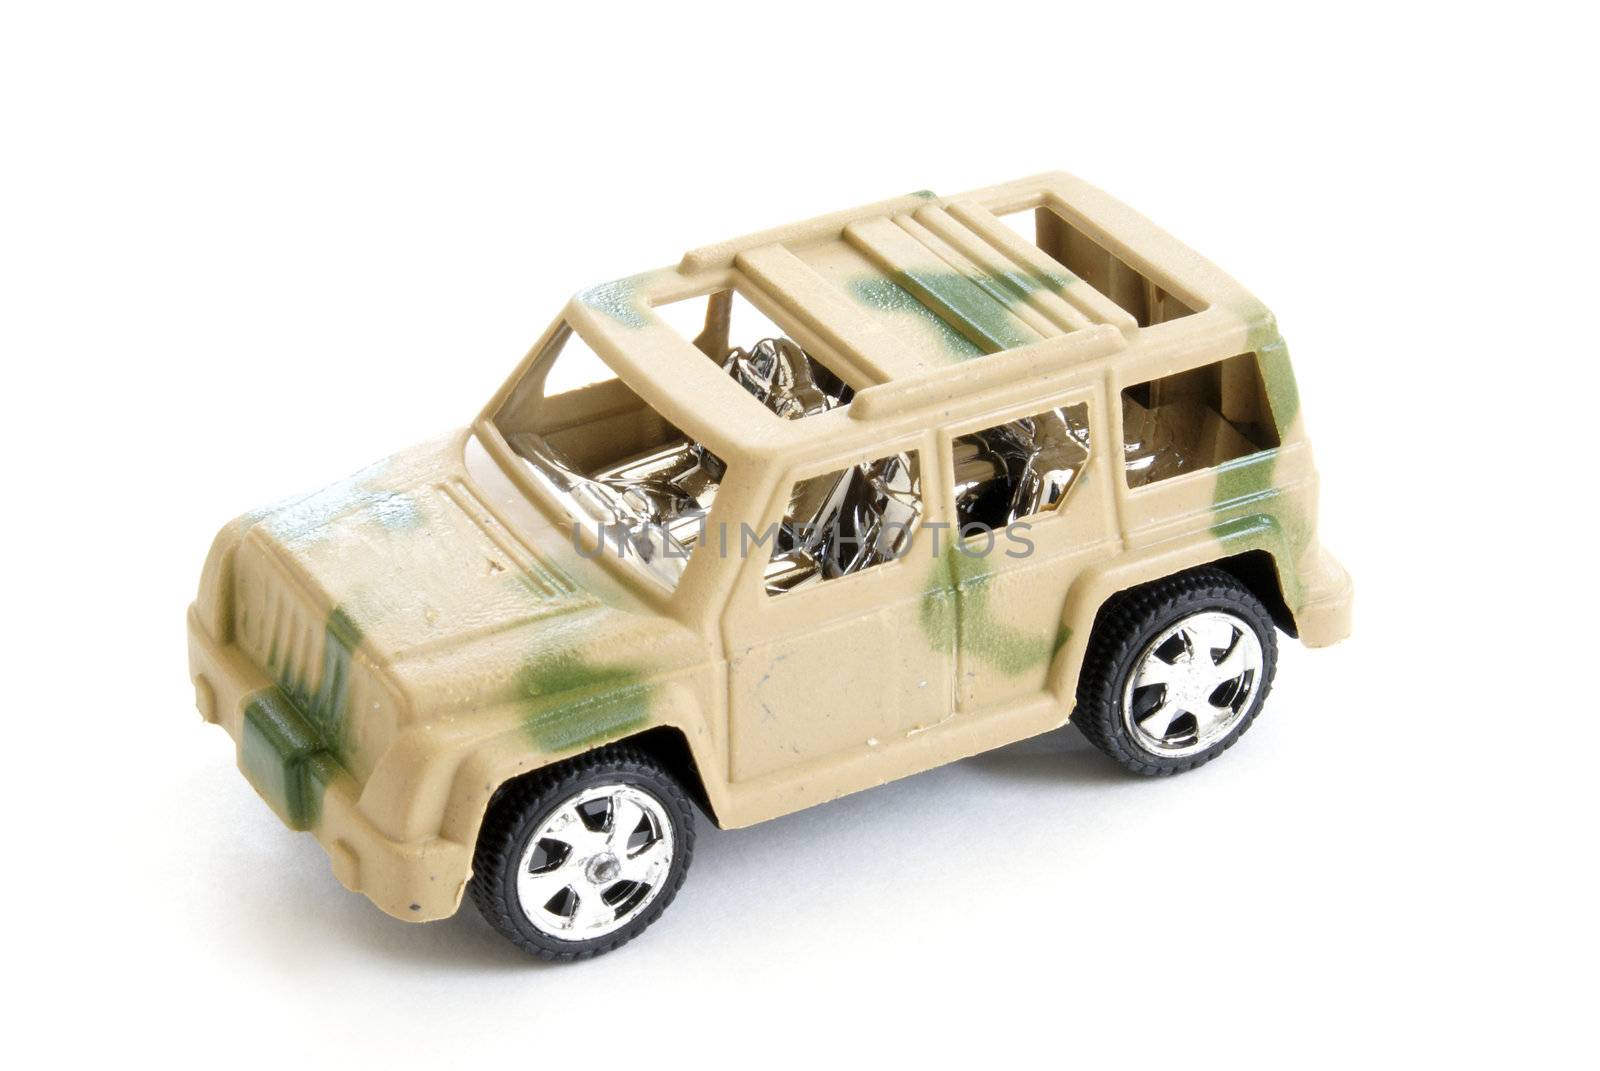 A single toy military vehicle on white background.